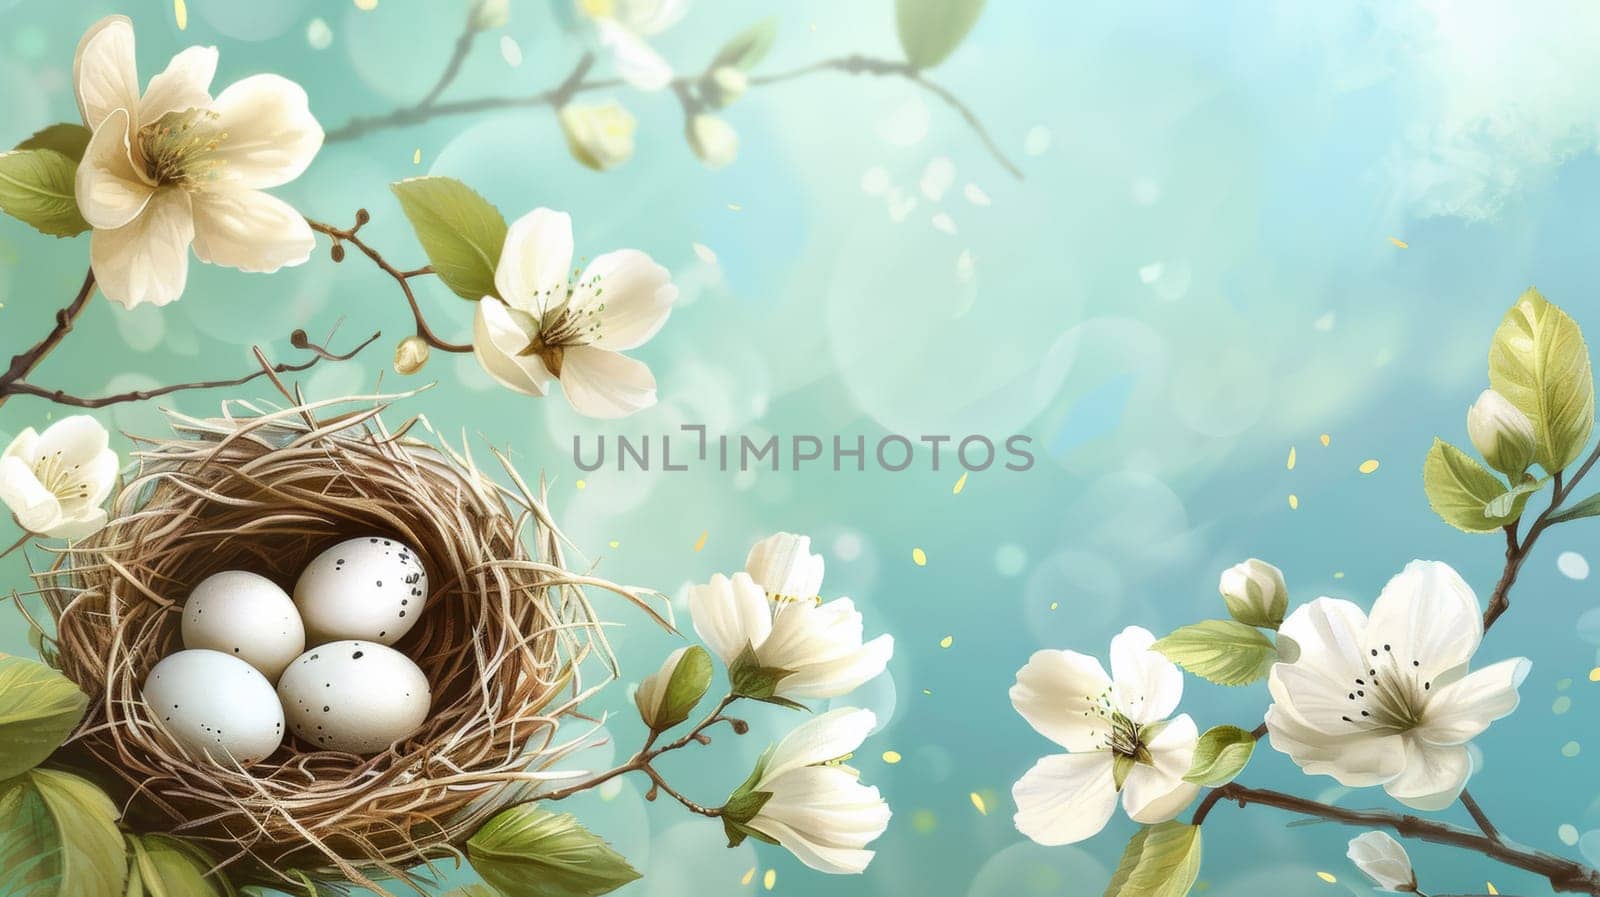 A painting of a bird nest with eggs in it on top of flowers